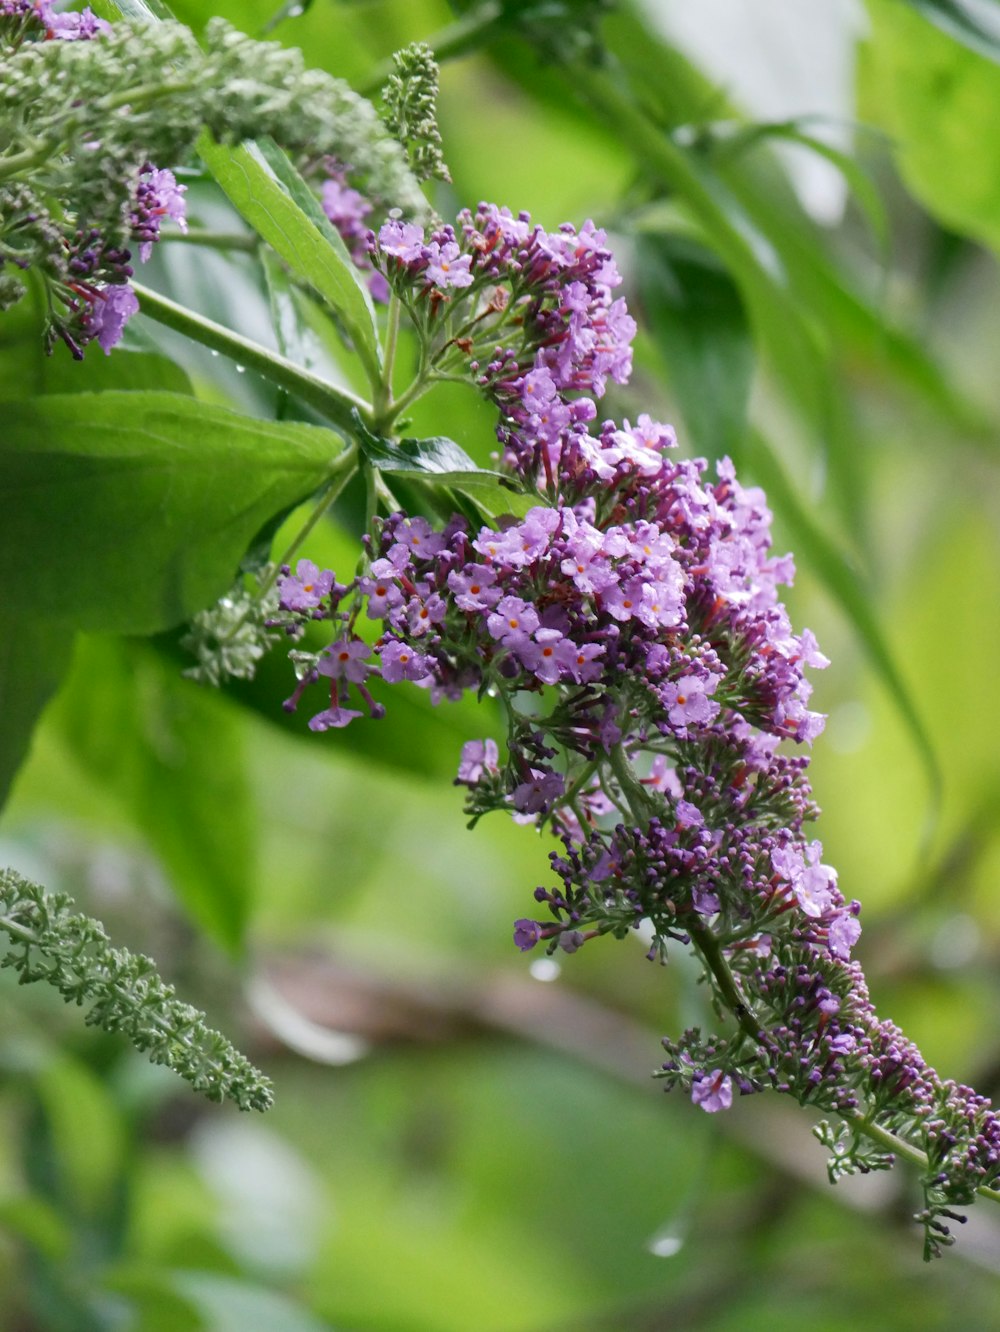 a branch of a plant with purple flowers